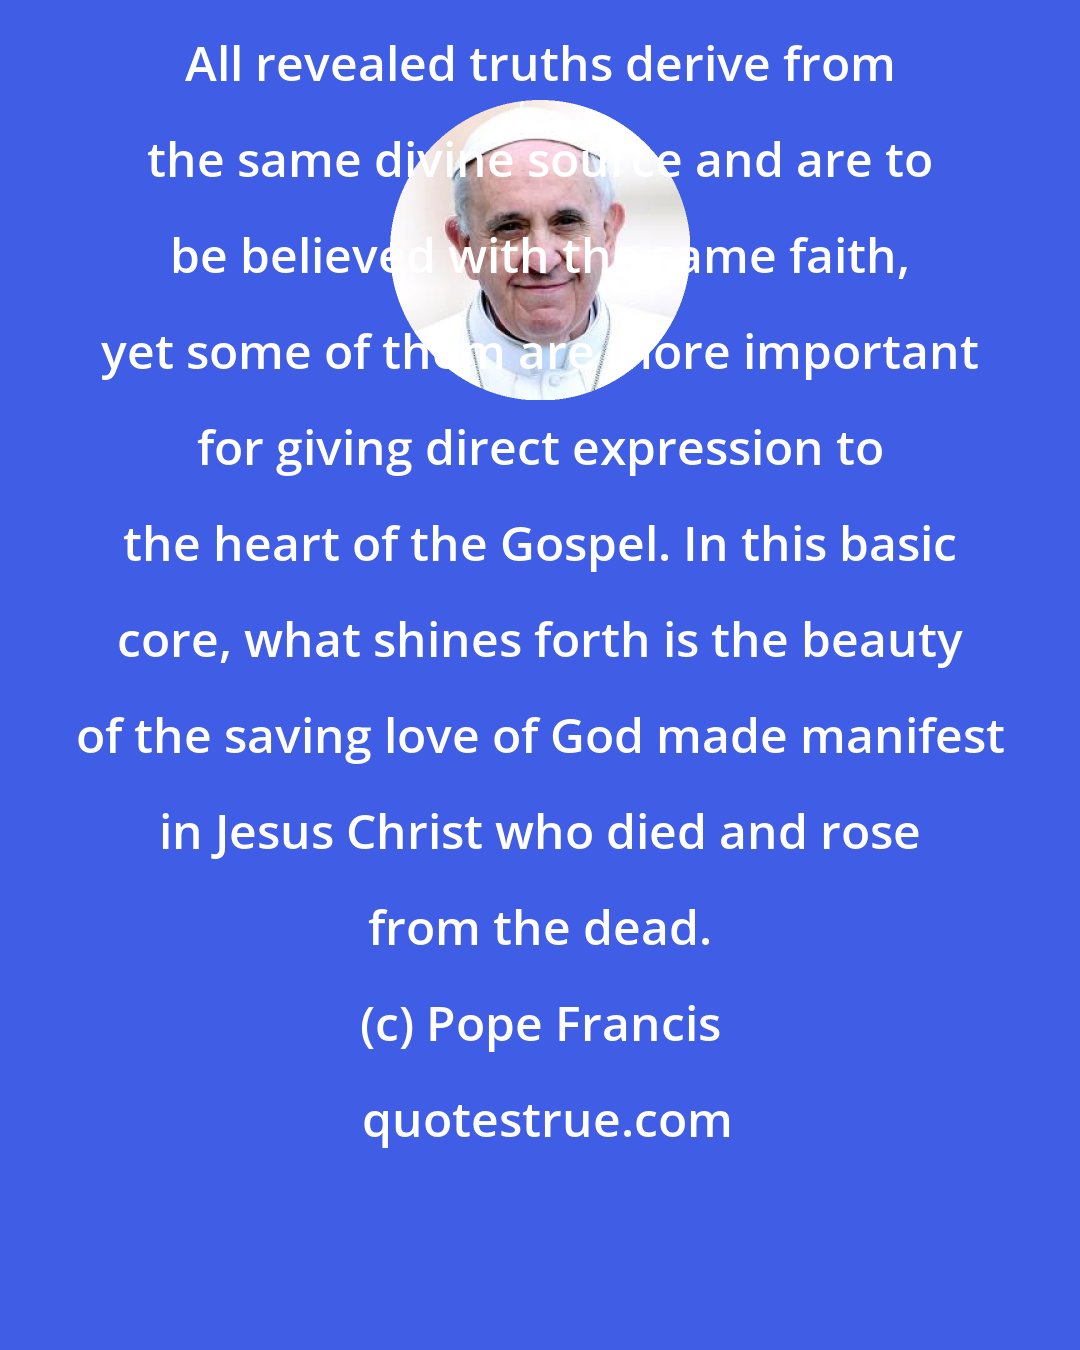 Pope Francis: All revealed truths derive from the same divine source and are to be believed with the same faith, yet some of them are more important for giving direct expression to the heart of the Gospel. In this basic core, what shines forth is the beauty of the saving love of God made manifest in Jesus Christ who died and rose from the dead.